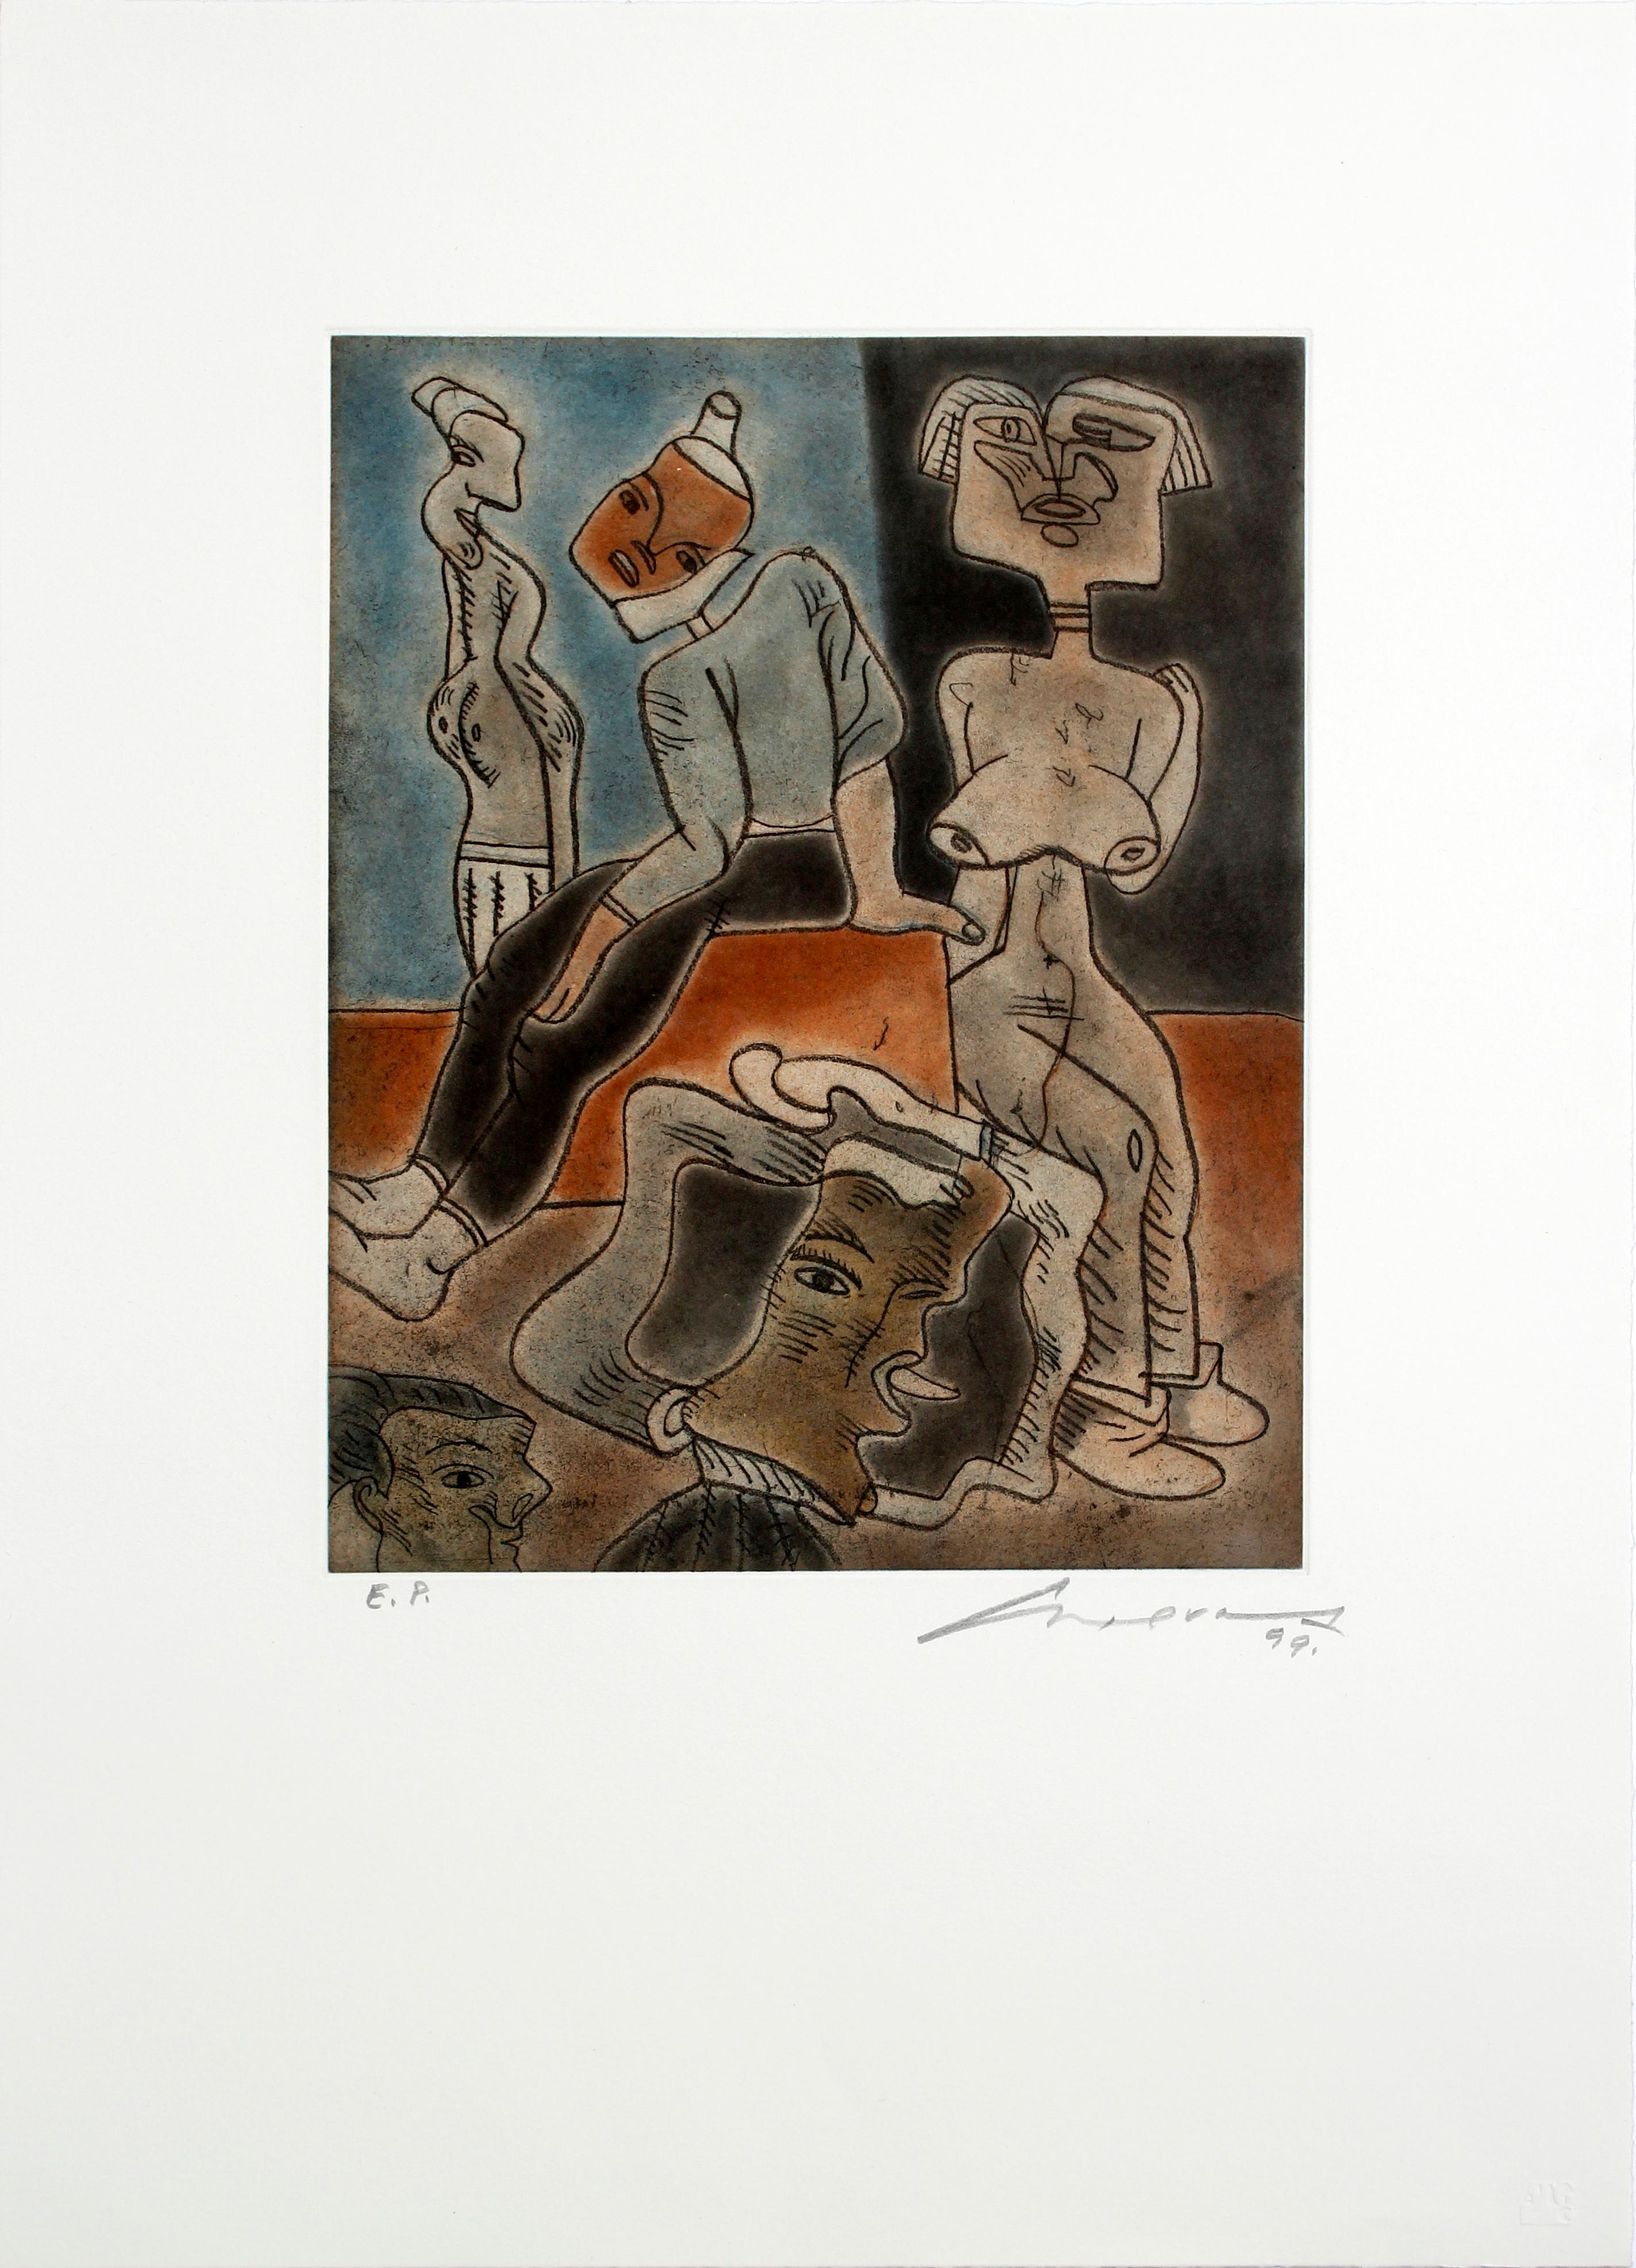 E.P. (Editor's Proof). Signed by José Luis Cuevas on the lower right. We provide with a signed certificate of authenticity by the publisher. 

Paper size: 55 x 38 cm
Print size: 30 x 23 cm

José Luis Cuevas made etchings, illustrations, sculptures,